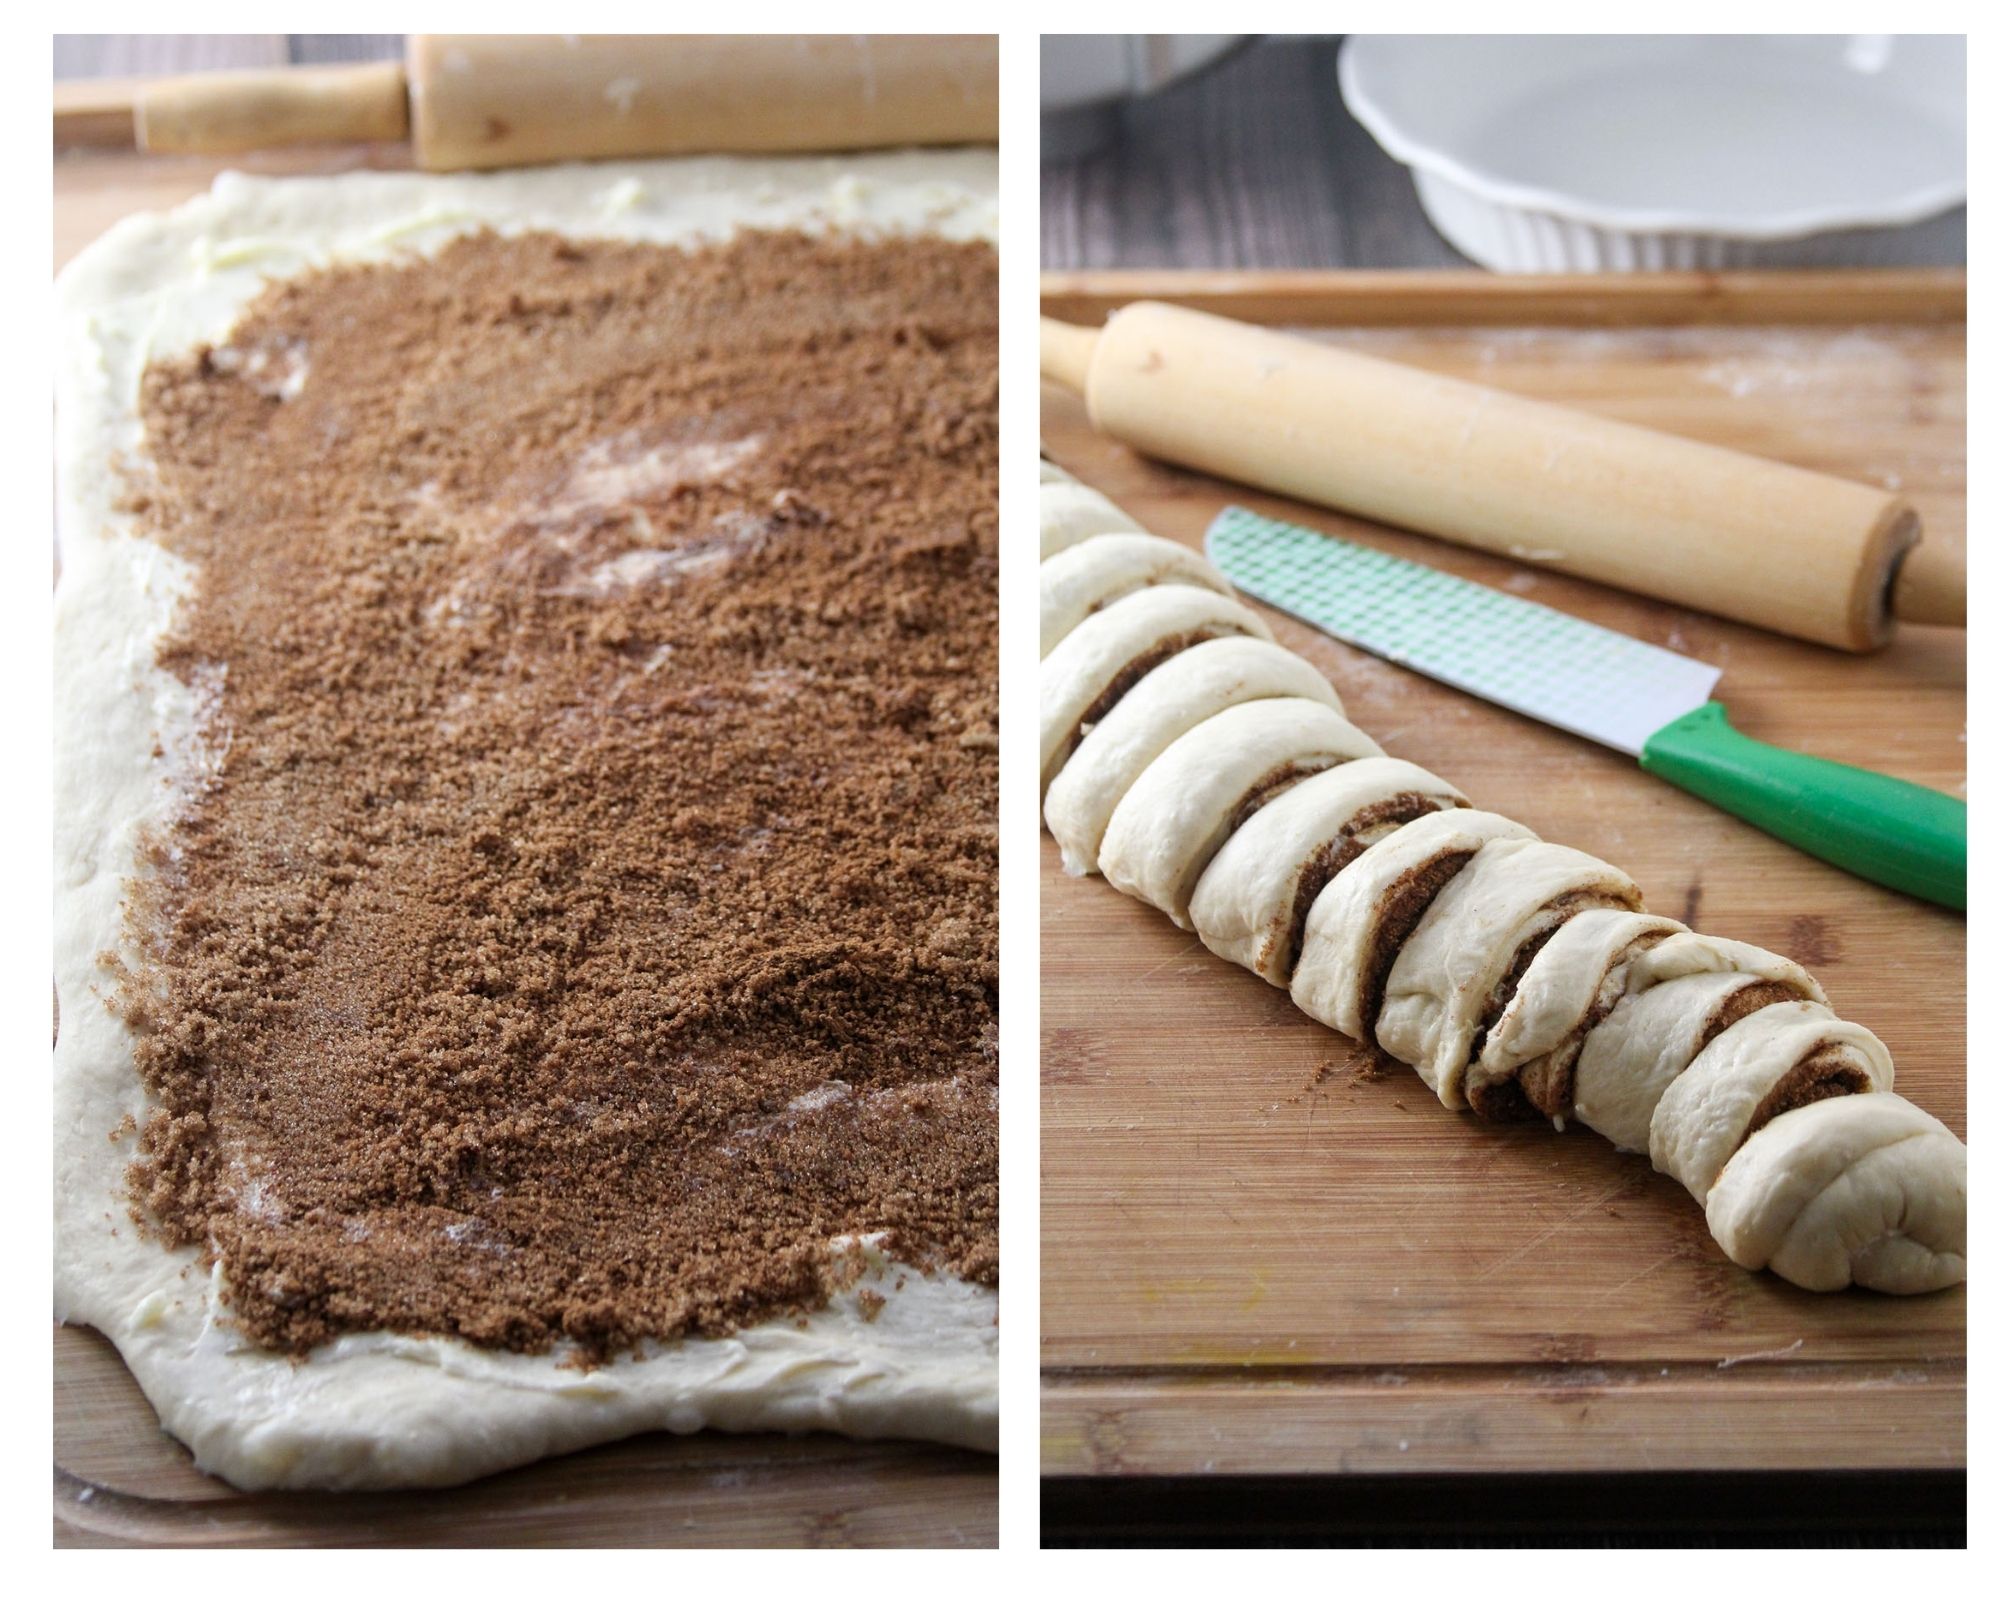 A collage showing the filling of the dough for cinnamon rolls and slicing it into discs.